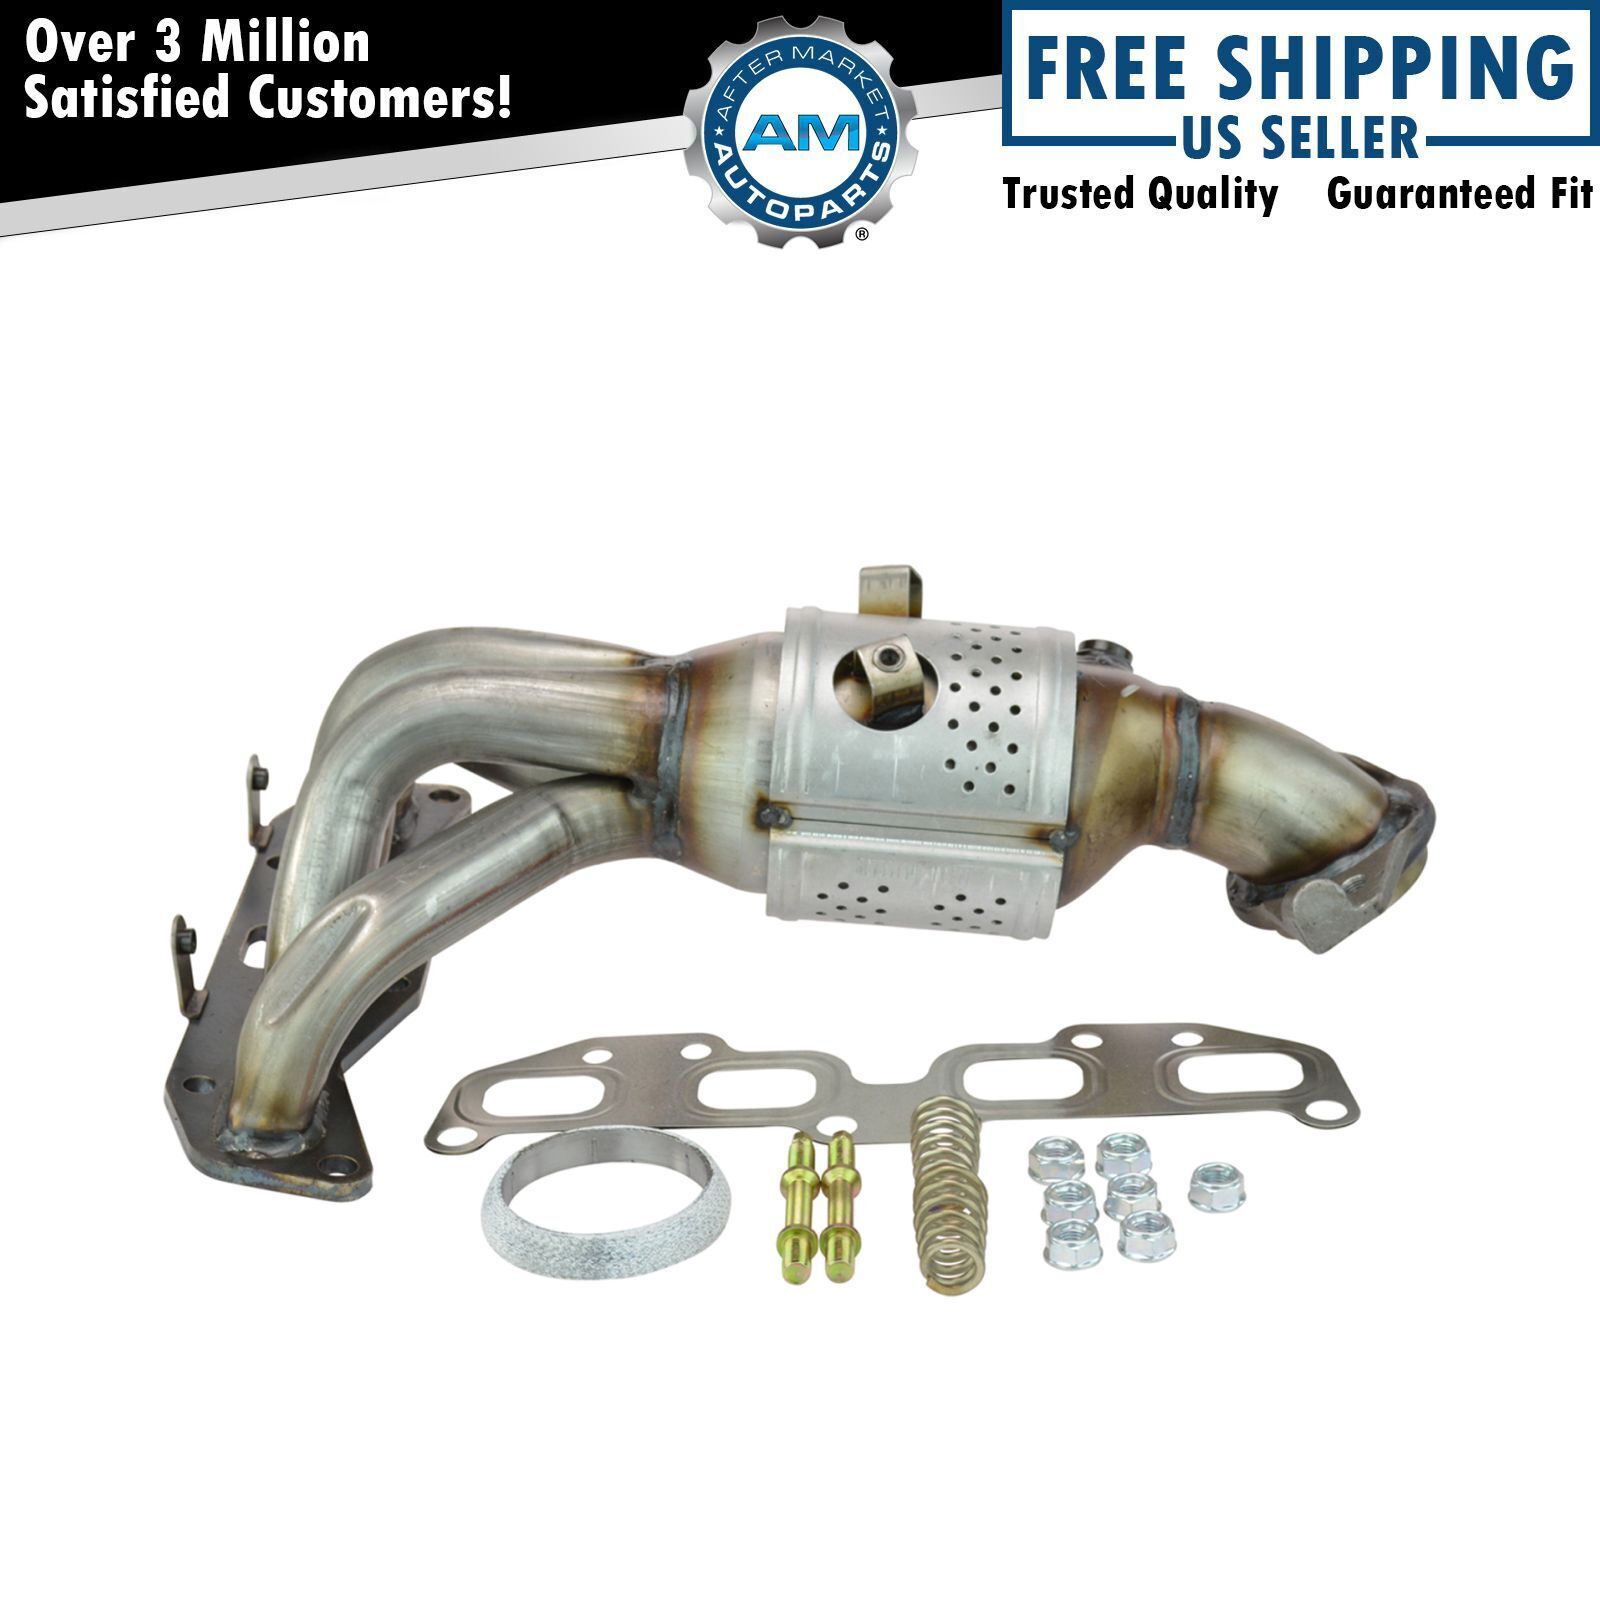 Exhaust Manifold w/ Catalytic Converter For 2002-2006 Nissan Sentra Altima 2.5L